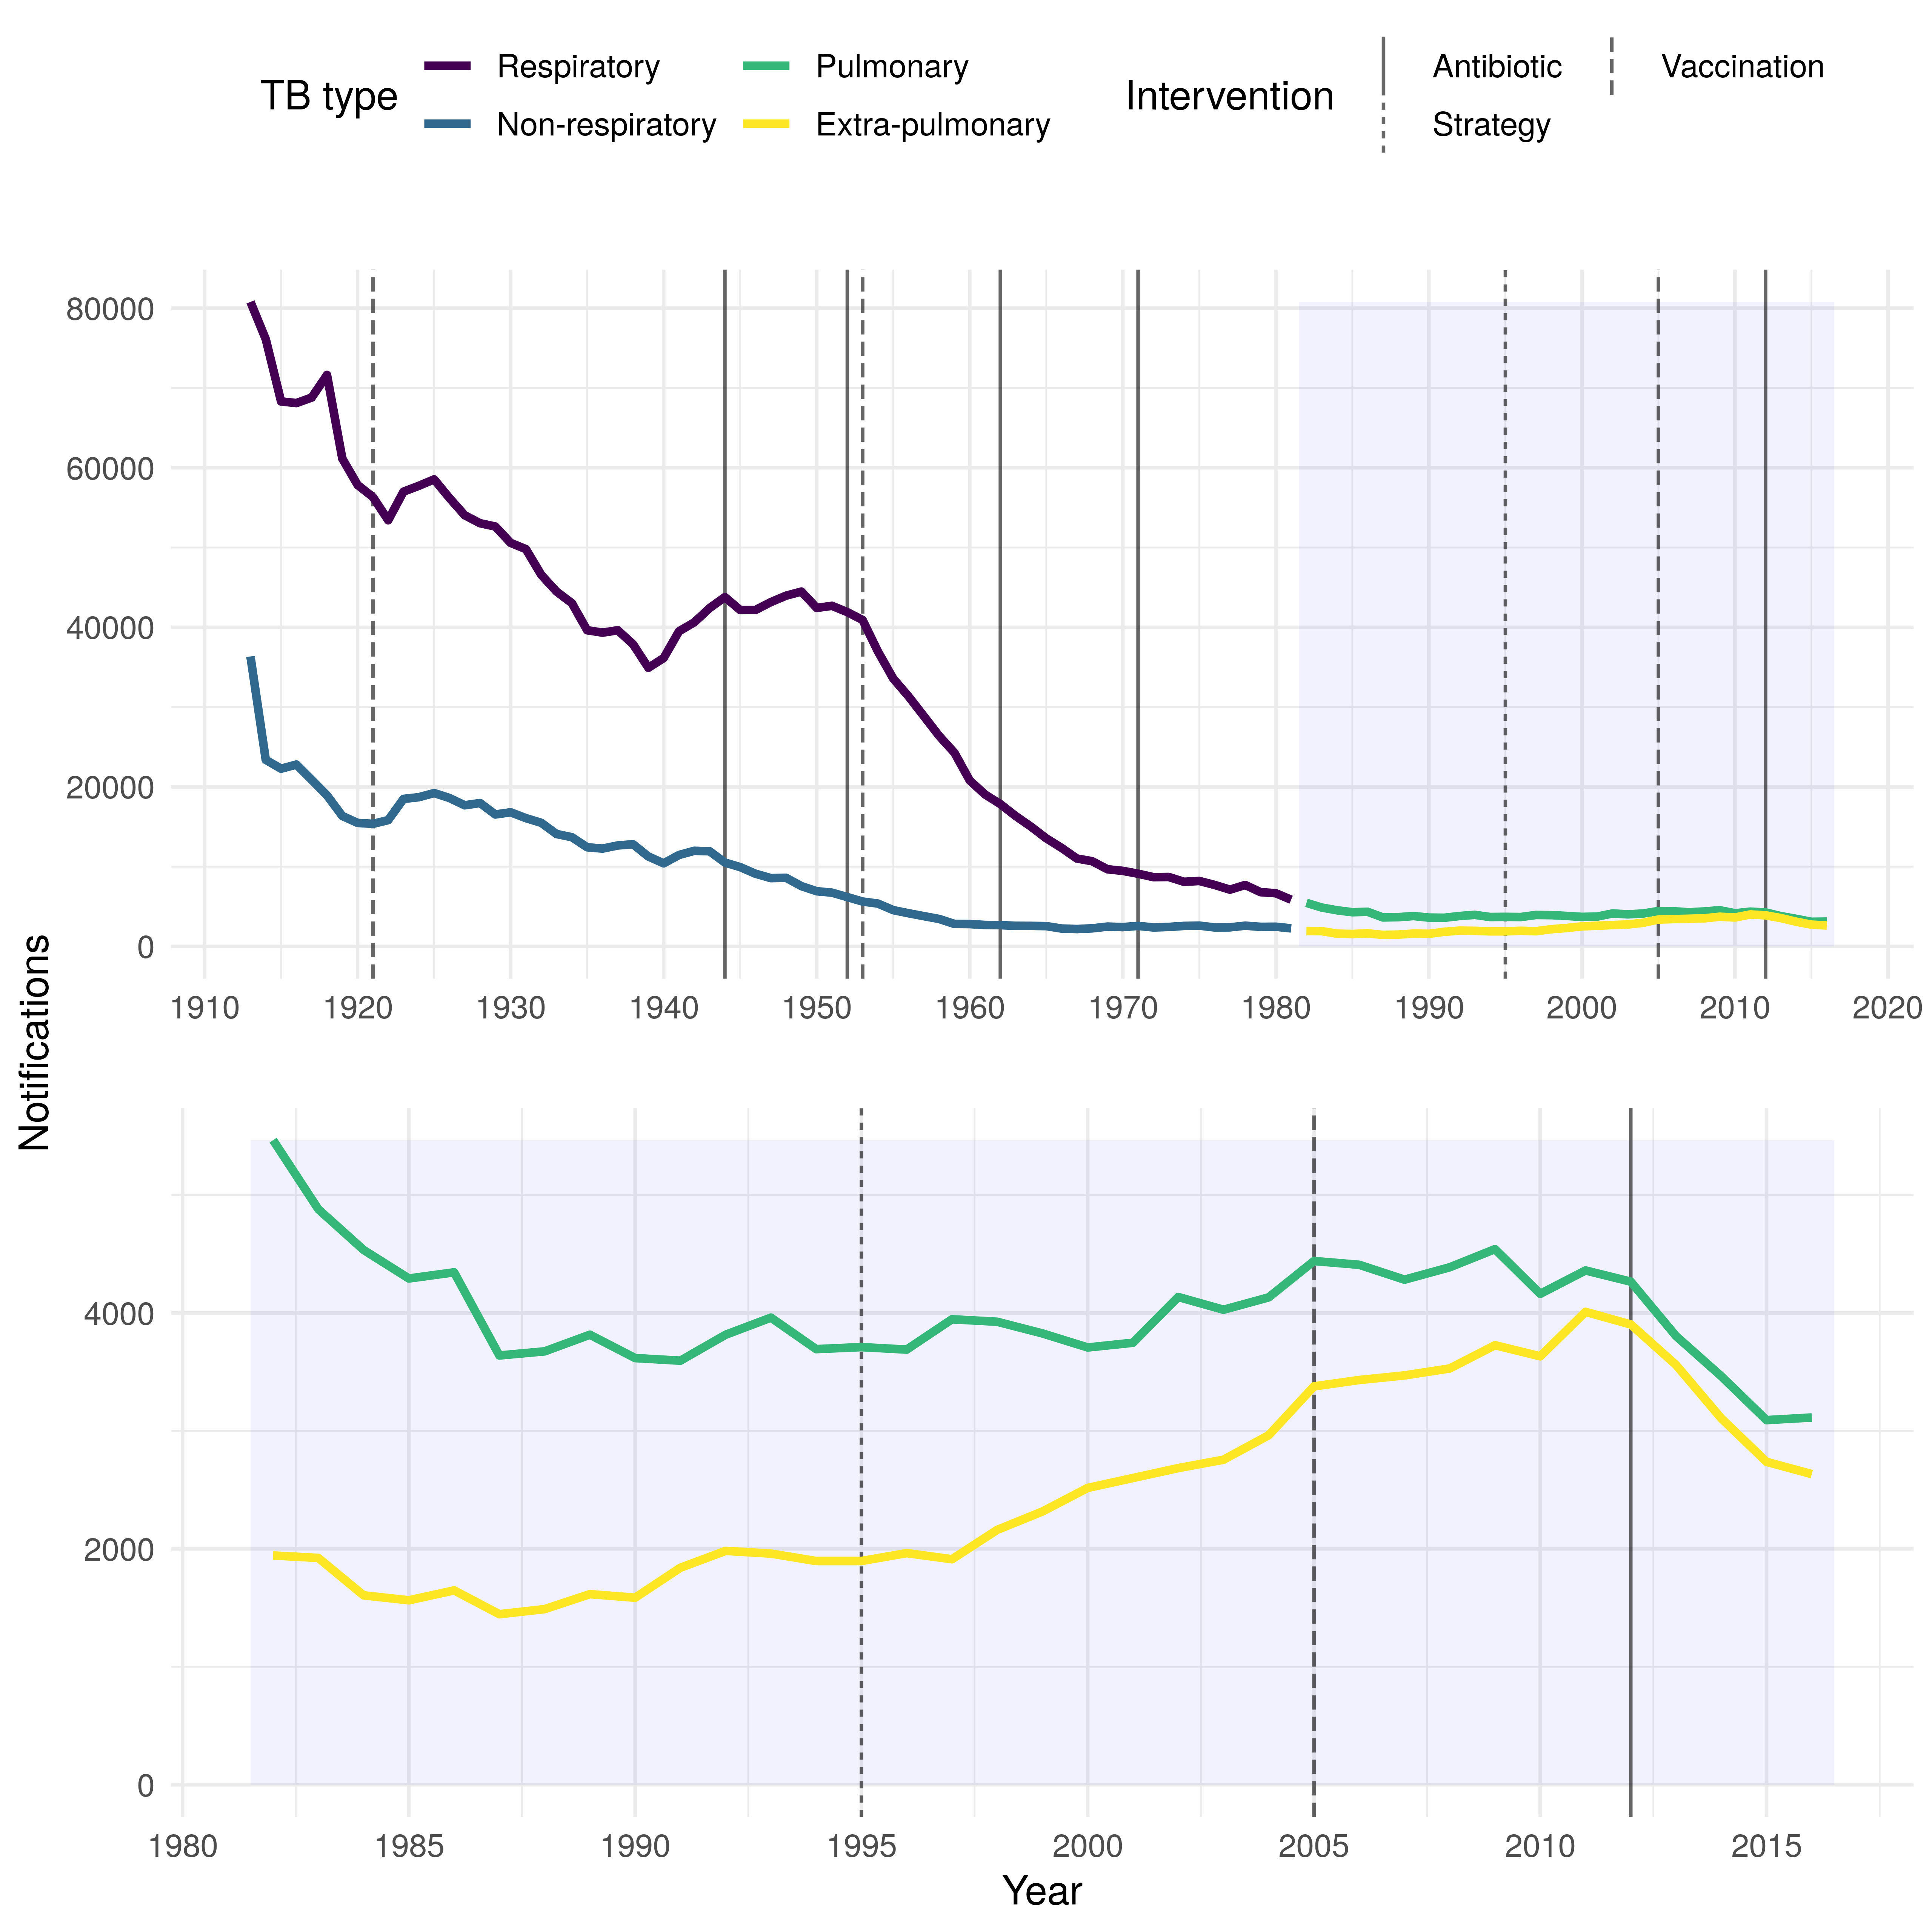 TB notifications in England and Wales from 1913 to 2017, stratified initially by respiratory/non-respiratory status and from 1982 by pulmonary/non-pulmonary TB. Interventions are highlighted with vertical lines, with linetype denoting the type of intervention, more information on each intervention is available in the corresponding table.